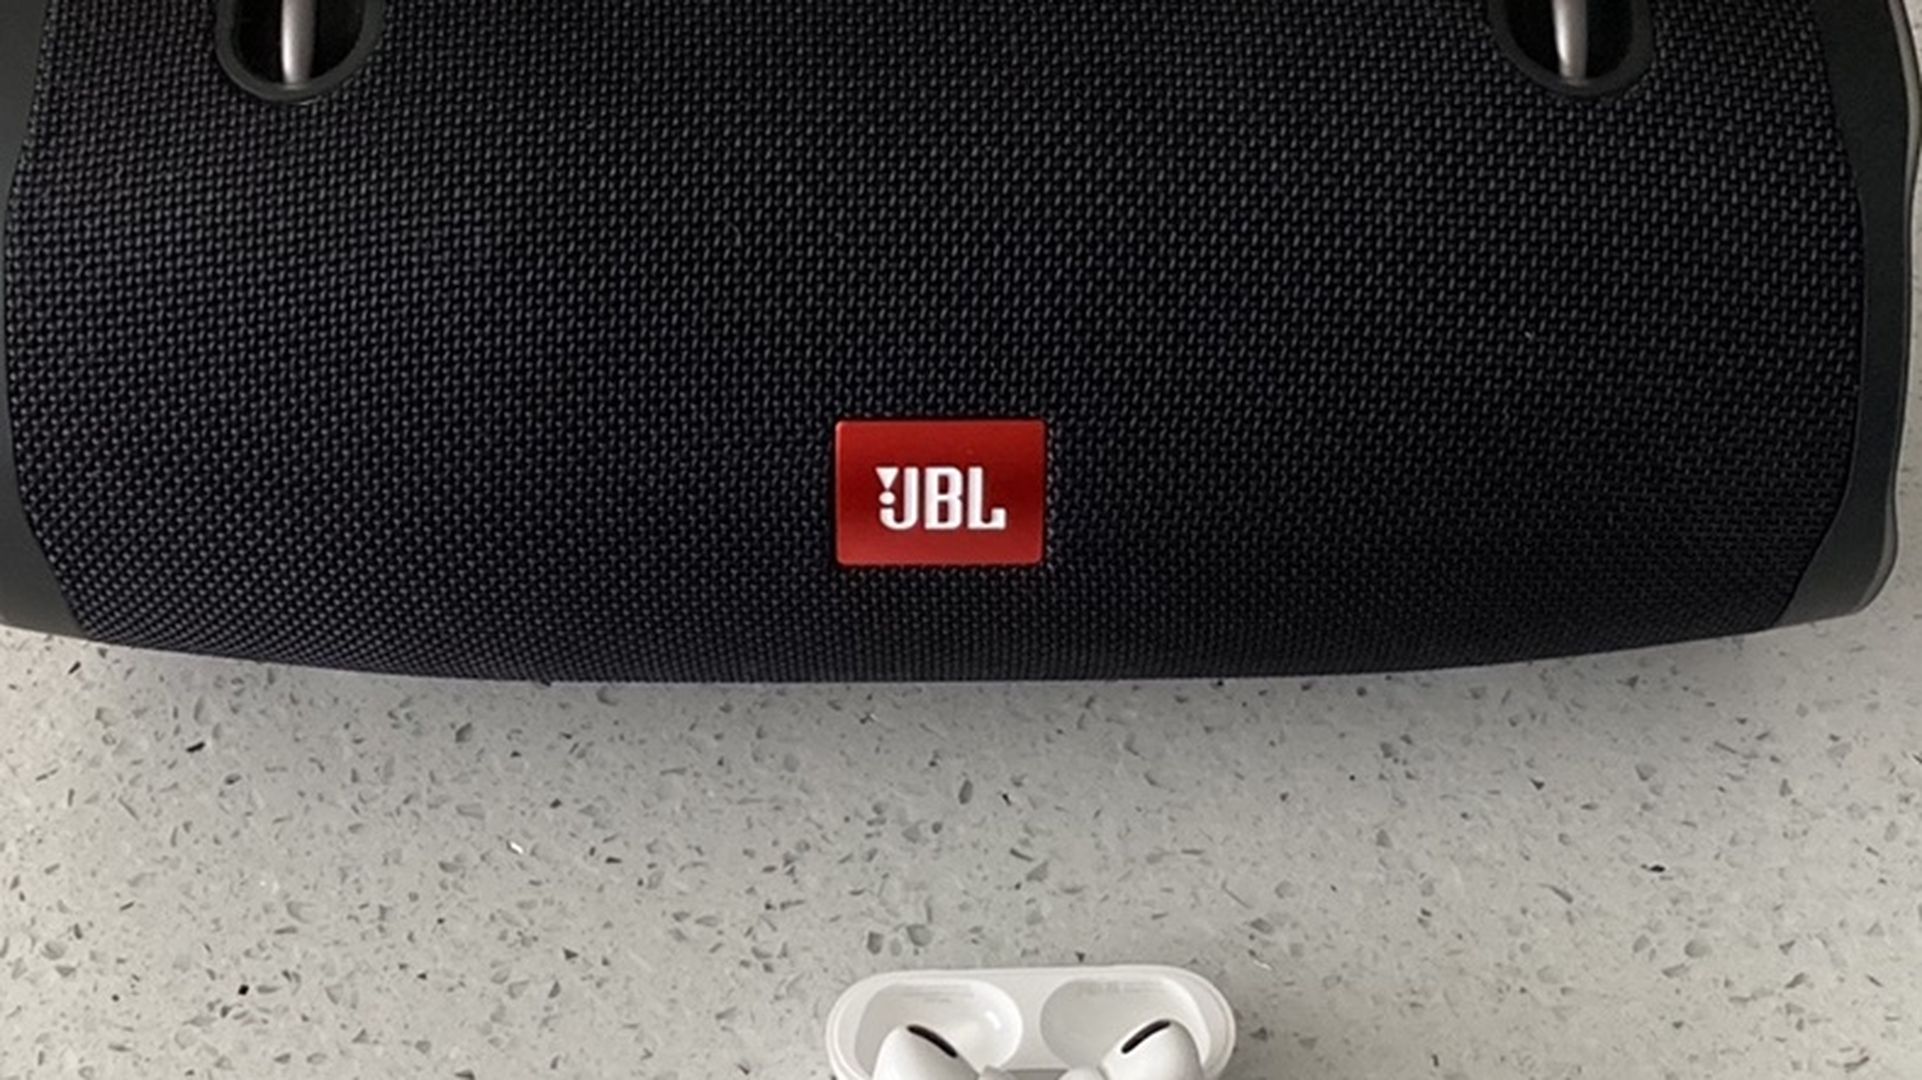 AirPods Pro And Jbl Extreme 2